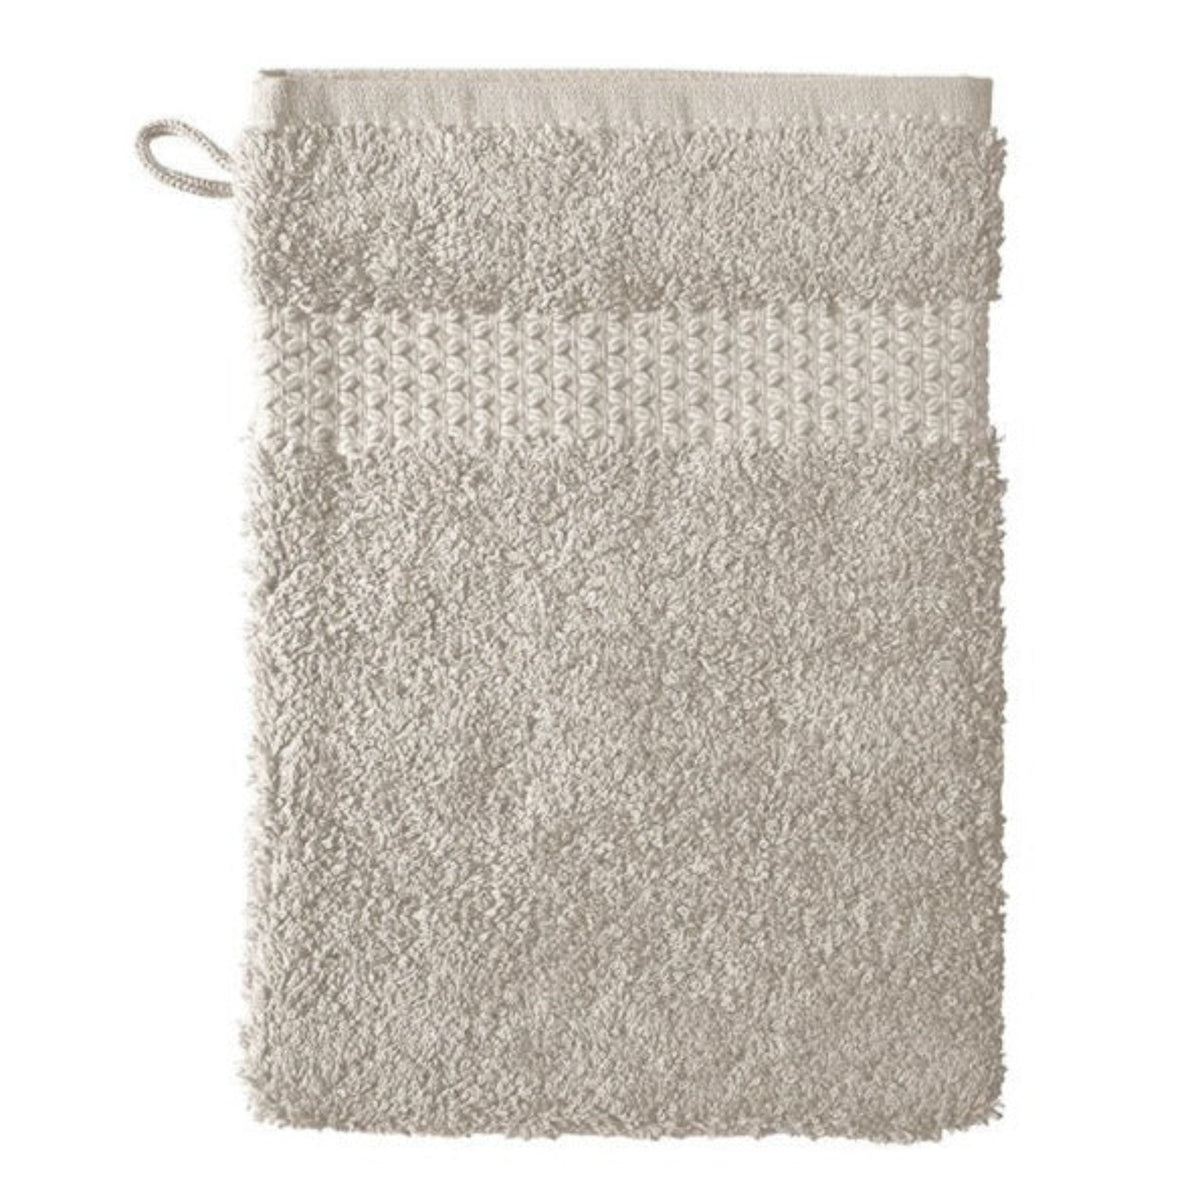 Bath Mitt of Yves Delorme Etoile Bath Collection in Pierre Color